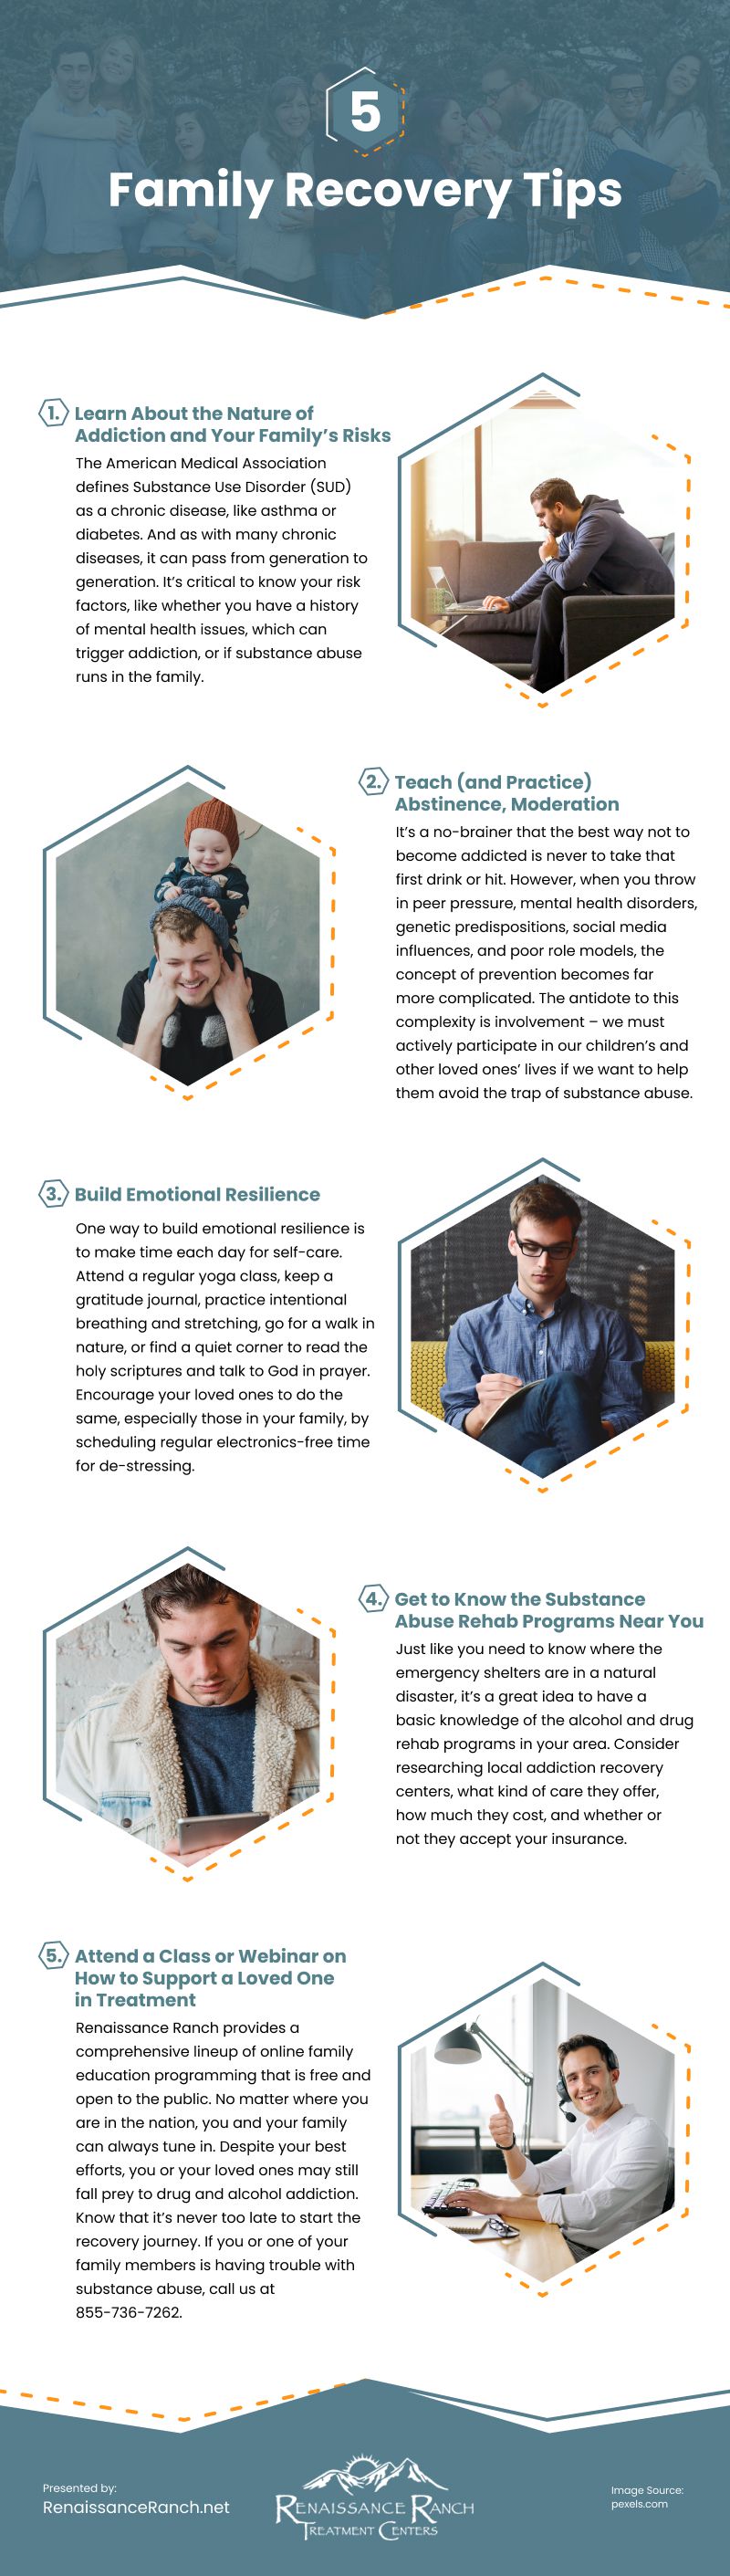 6 Family Recovery Tips Infographic